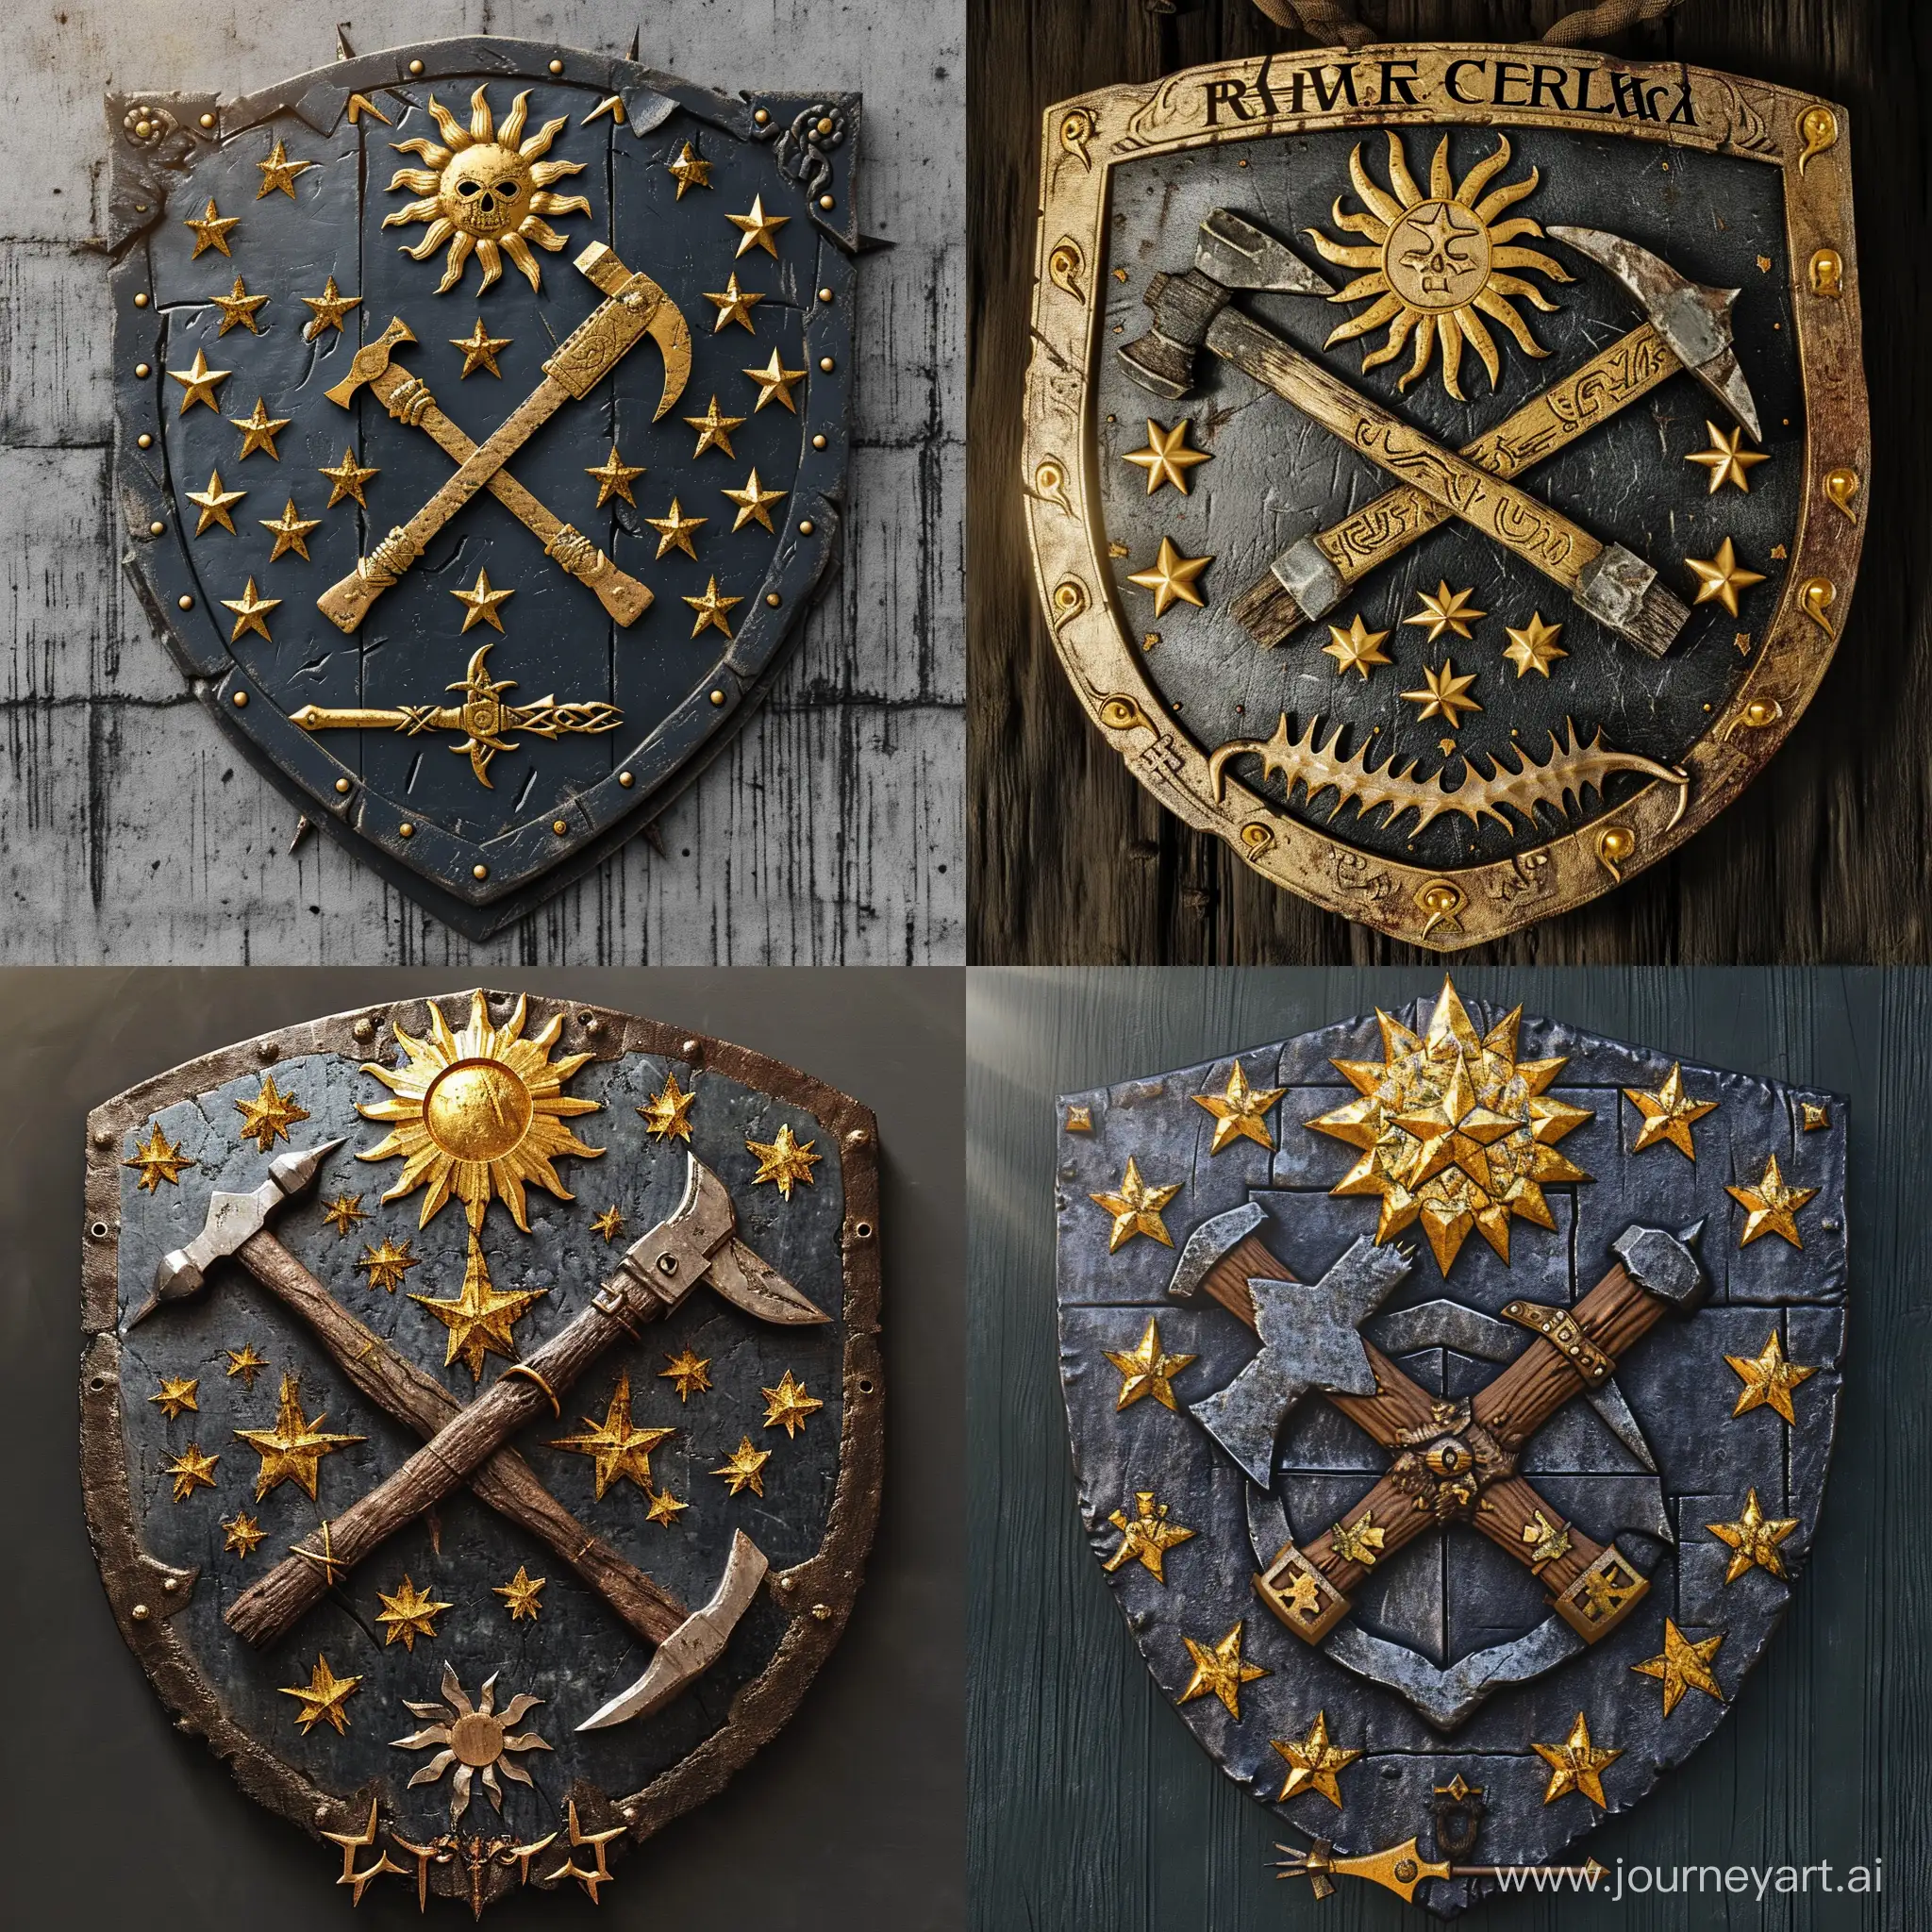 Medieval-Guild-Coat-of-Arms-with-Crossed-Pickaxe-and-Hammer